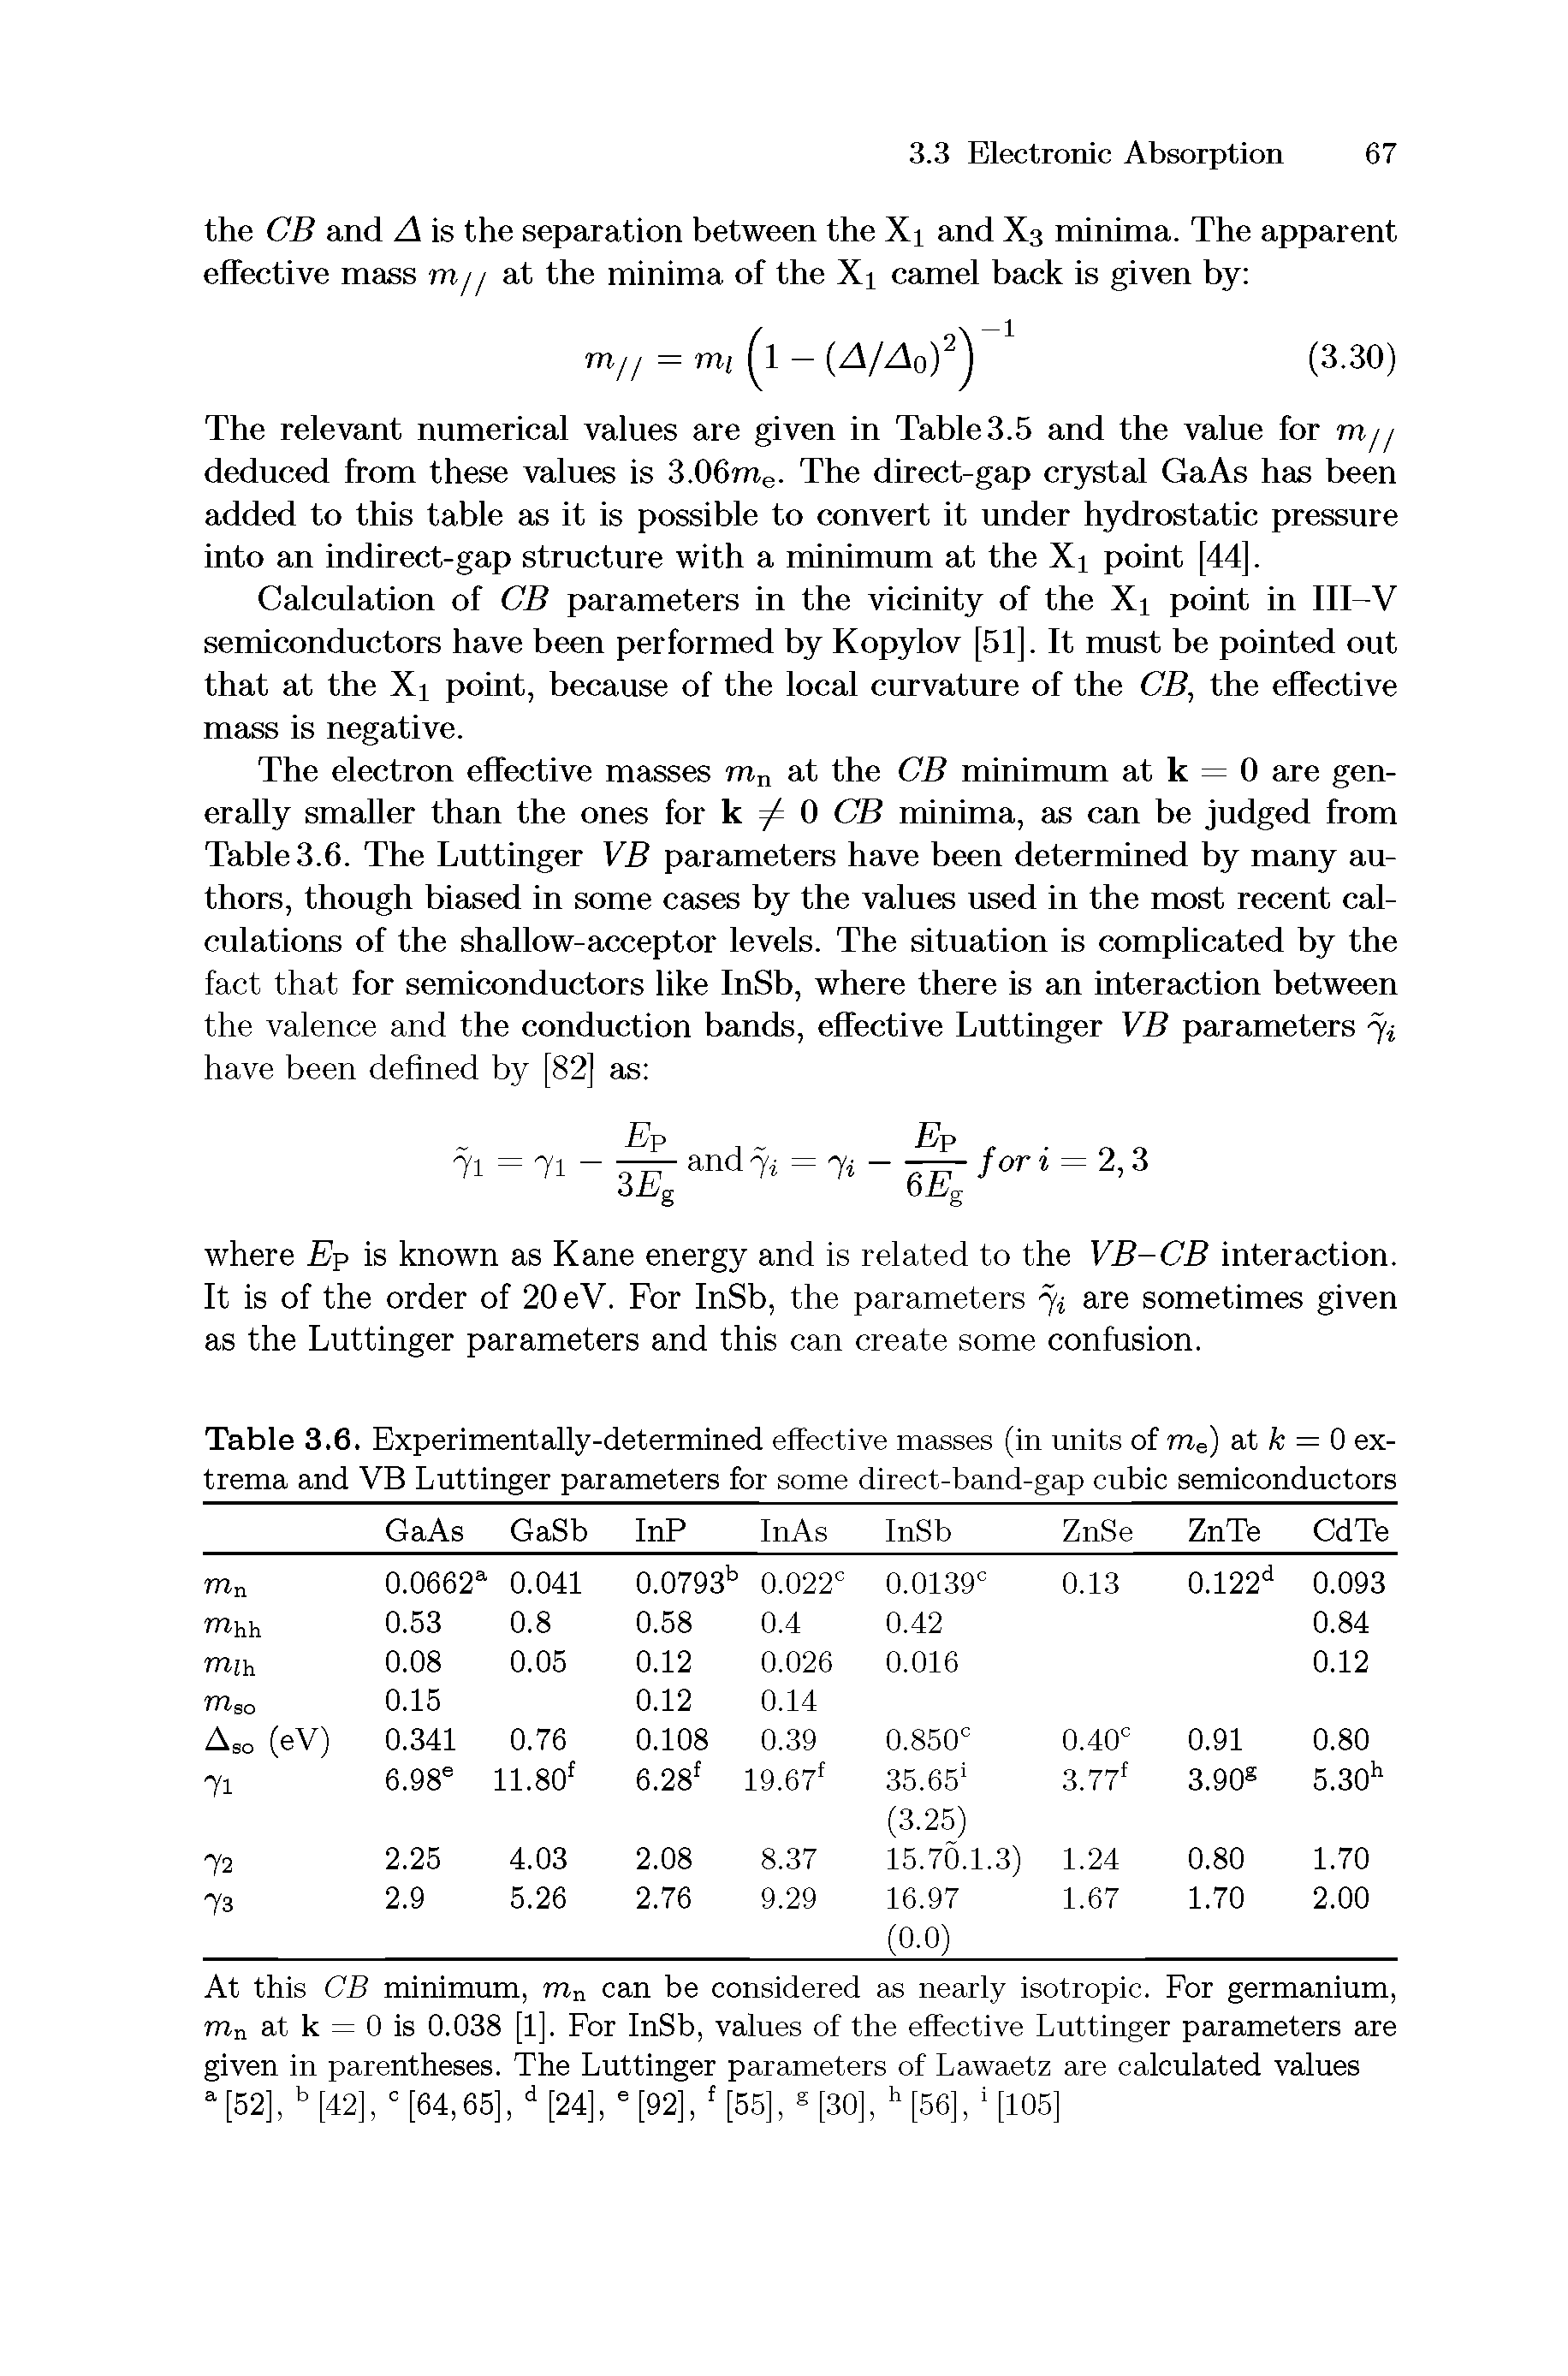 Table 3.6. Experimentally-determined effective masses (in units of me) at k = 0 extrema and VB Luttinger parameters for some direct-band-gap cubic semiconductors...